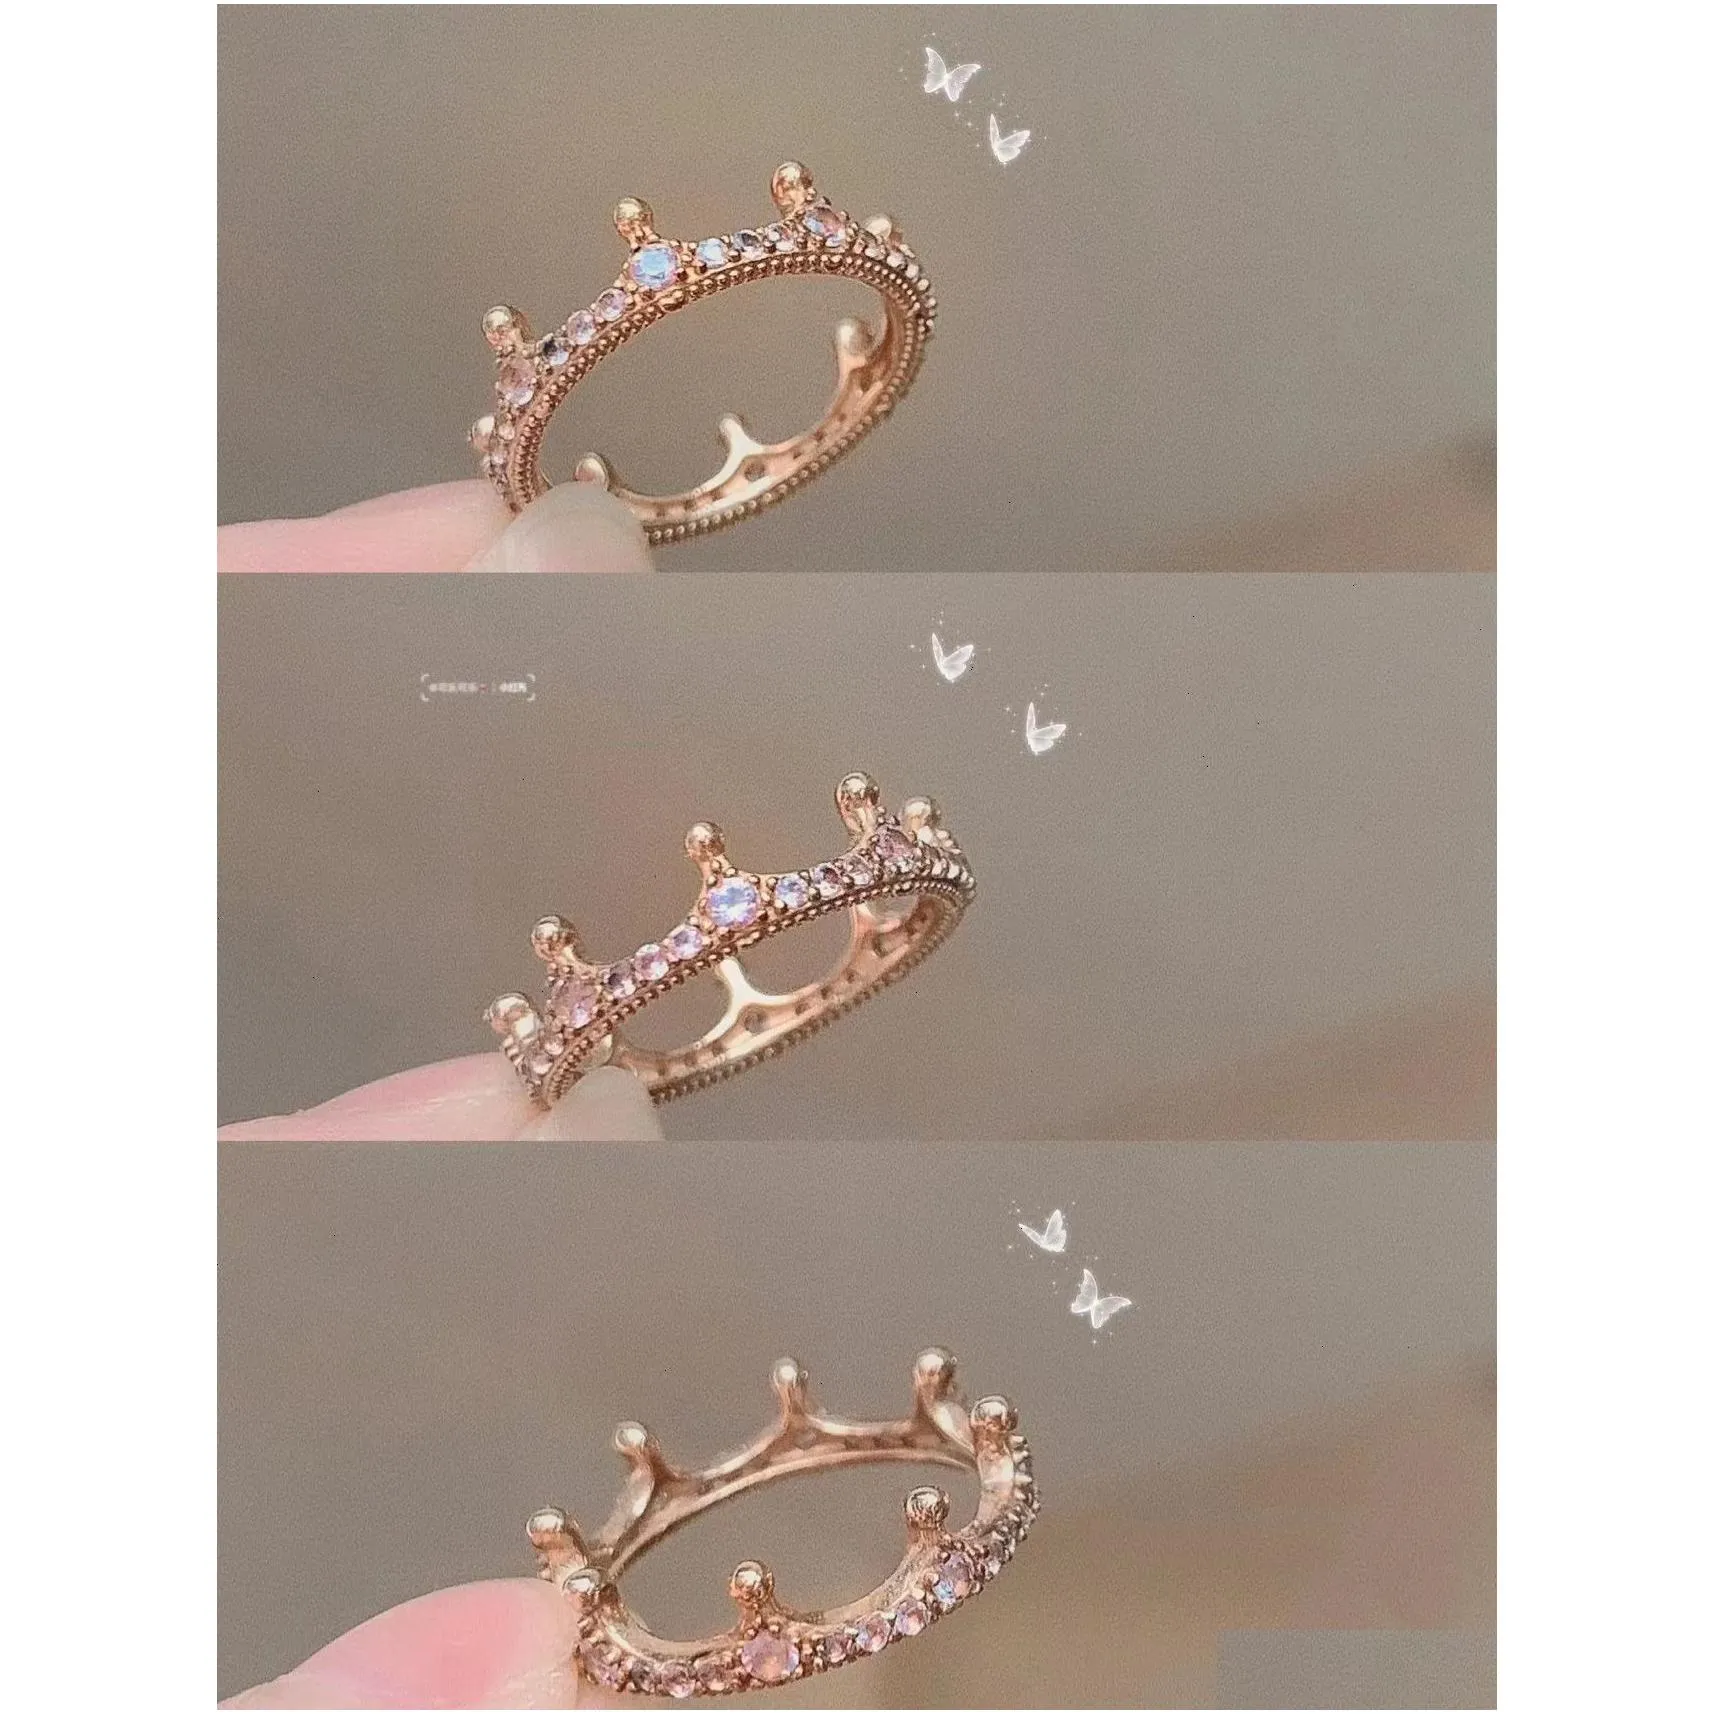 the 925 sterling silver ring rudder portum crown european style european style pandoras jewelry accessories wholesale